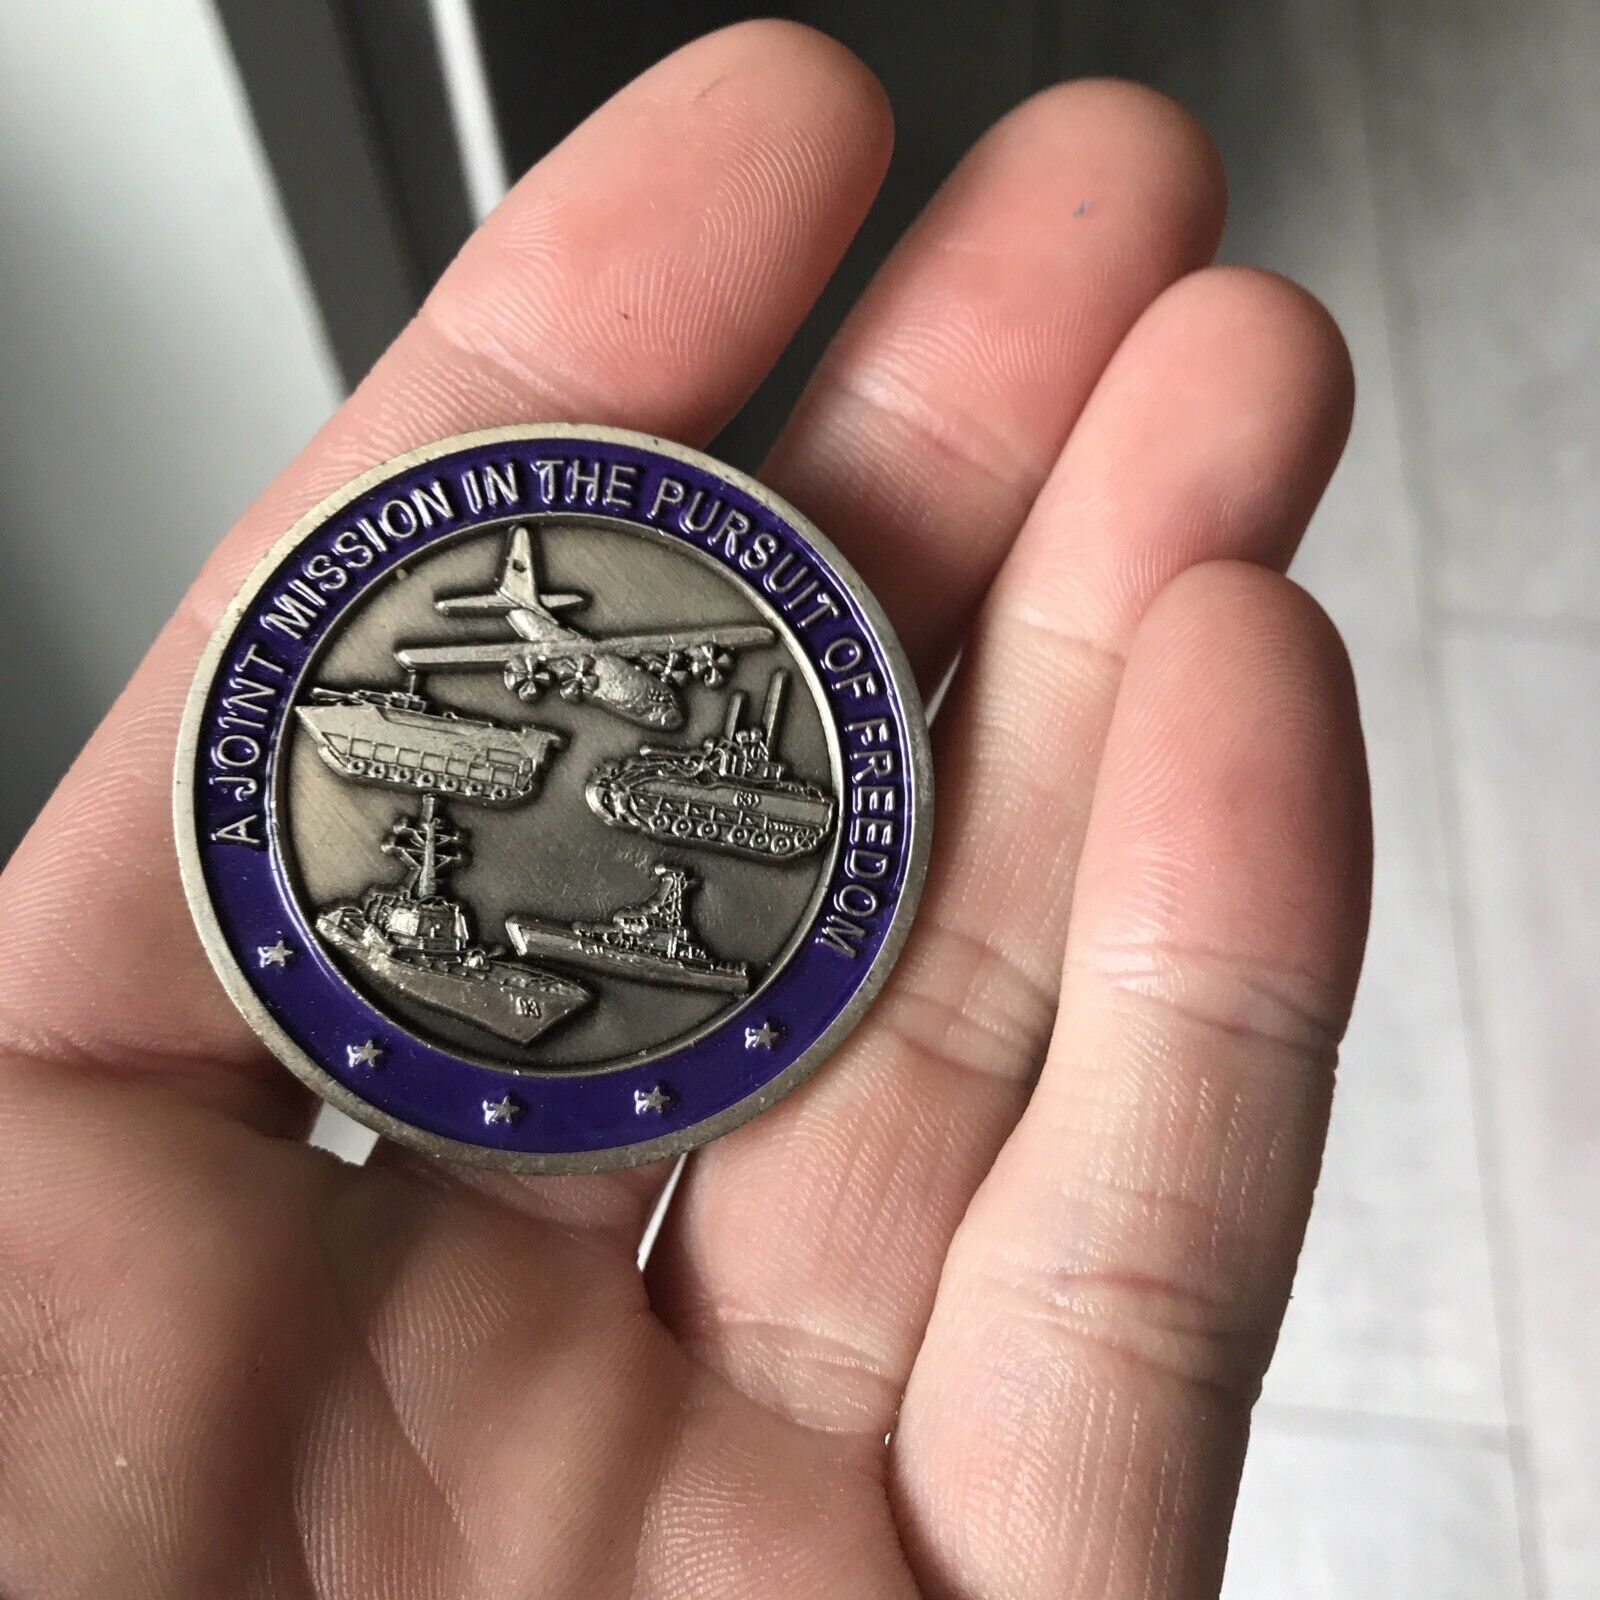 A Joint Mission in the pursuit of freedom Challenge Coin